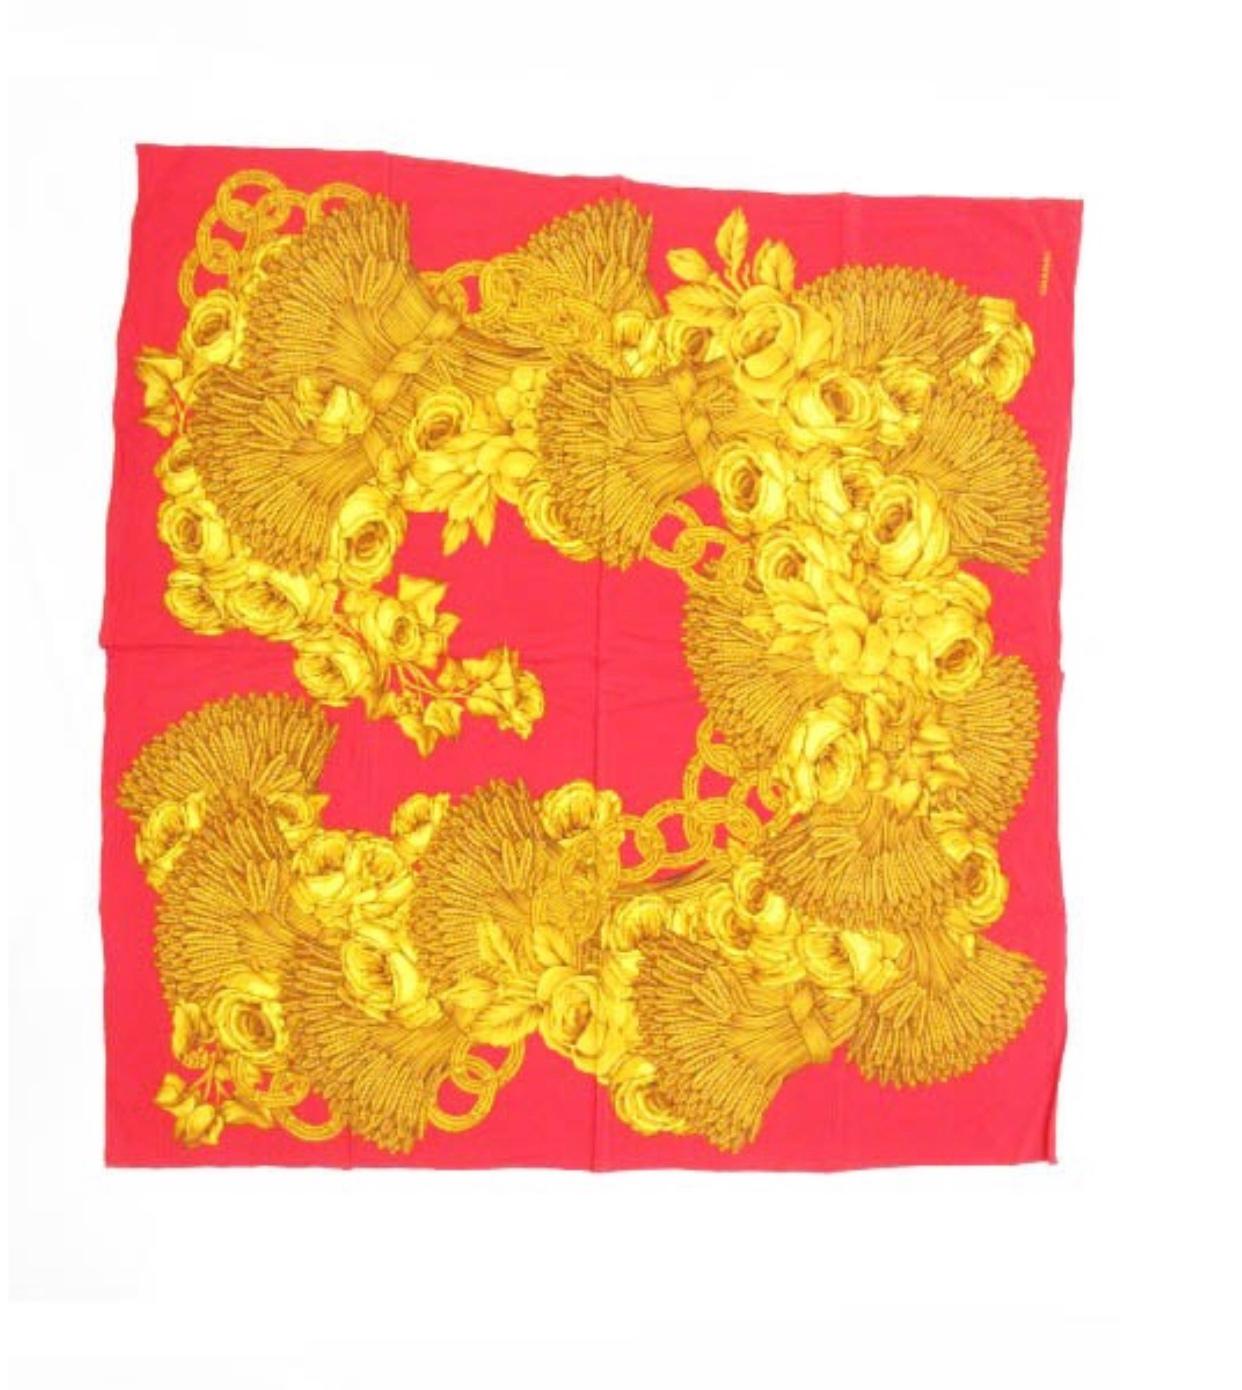 1990s. Vintage CHANEL red and gold color CC marks, rose, wheat, and chain pattern large silk scarf. Gorgeous wrapping.

This is a 100% silk scarf from CHANEL in the 90s. 
With red and gold combination, the CHANEL's CC motif, rose, wheat and chain